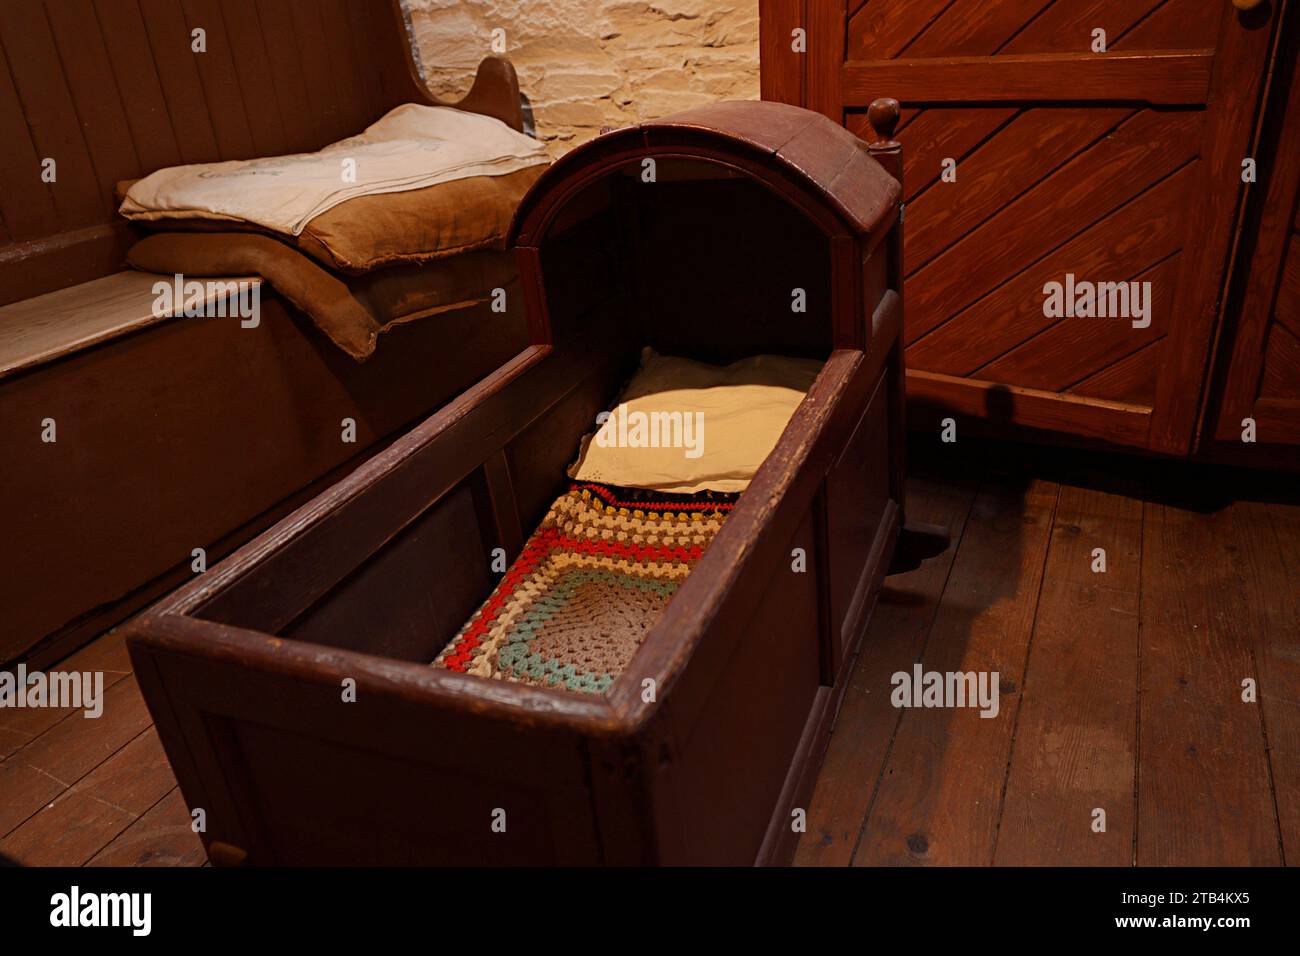 Vintage,antique furniture in the room comes from the south-east of Ireland. Stock Photo